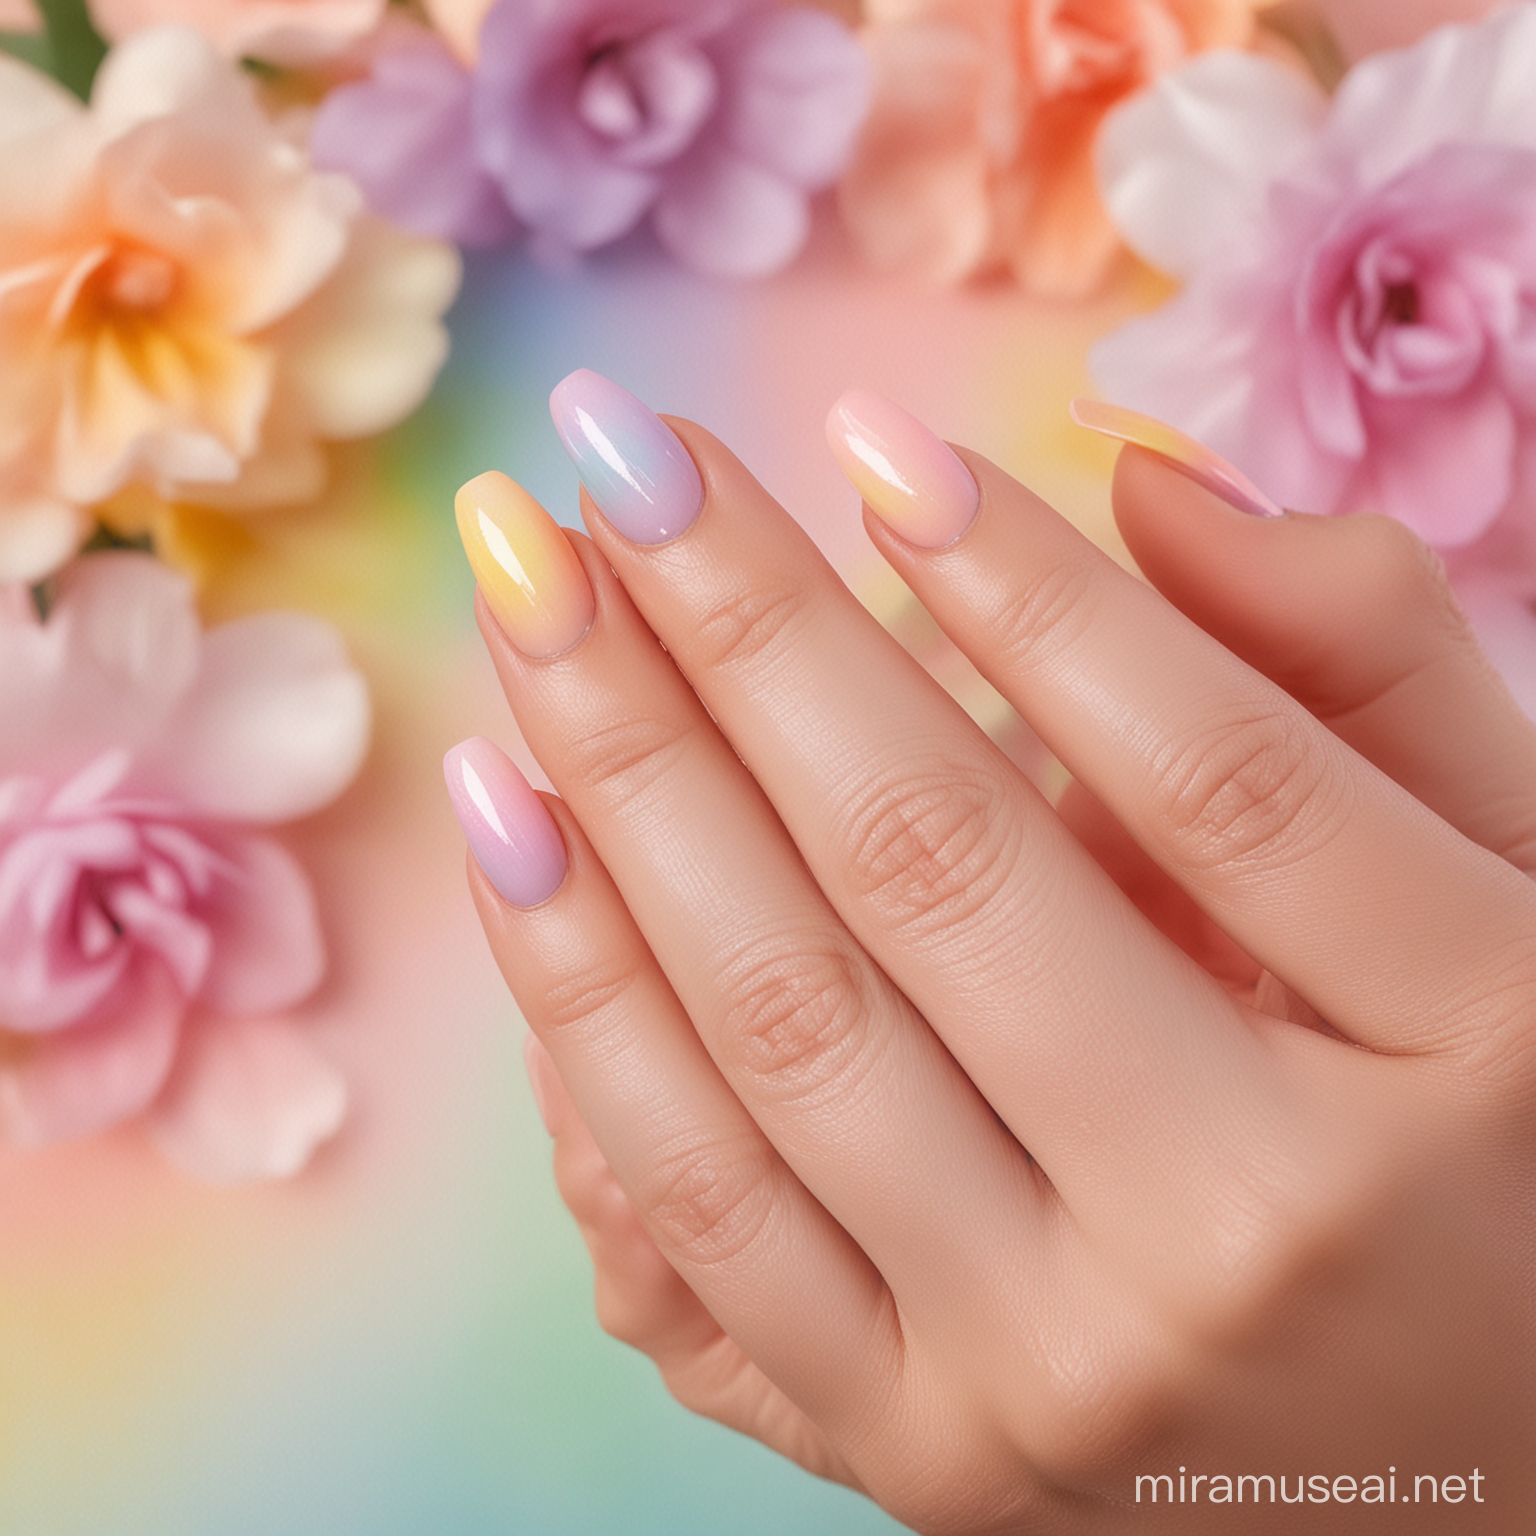 A close-up of hands with nails painted in a seamless pastel rainbow gradient, embodying the soft colors of spring, against a light, floral background.